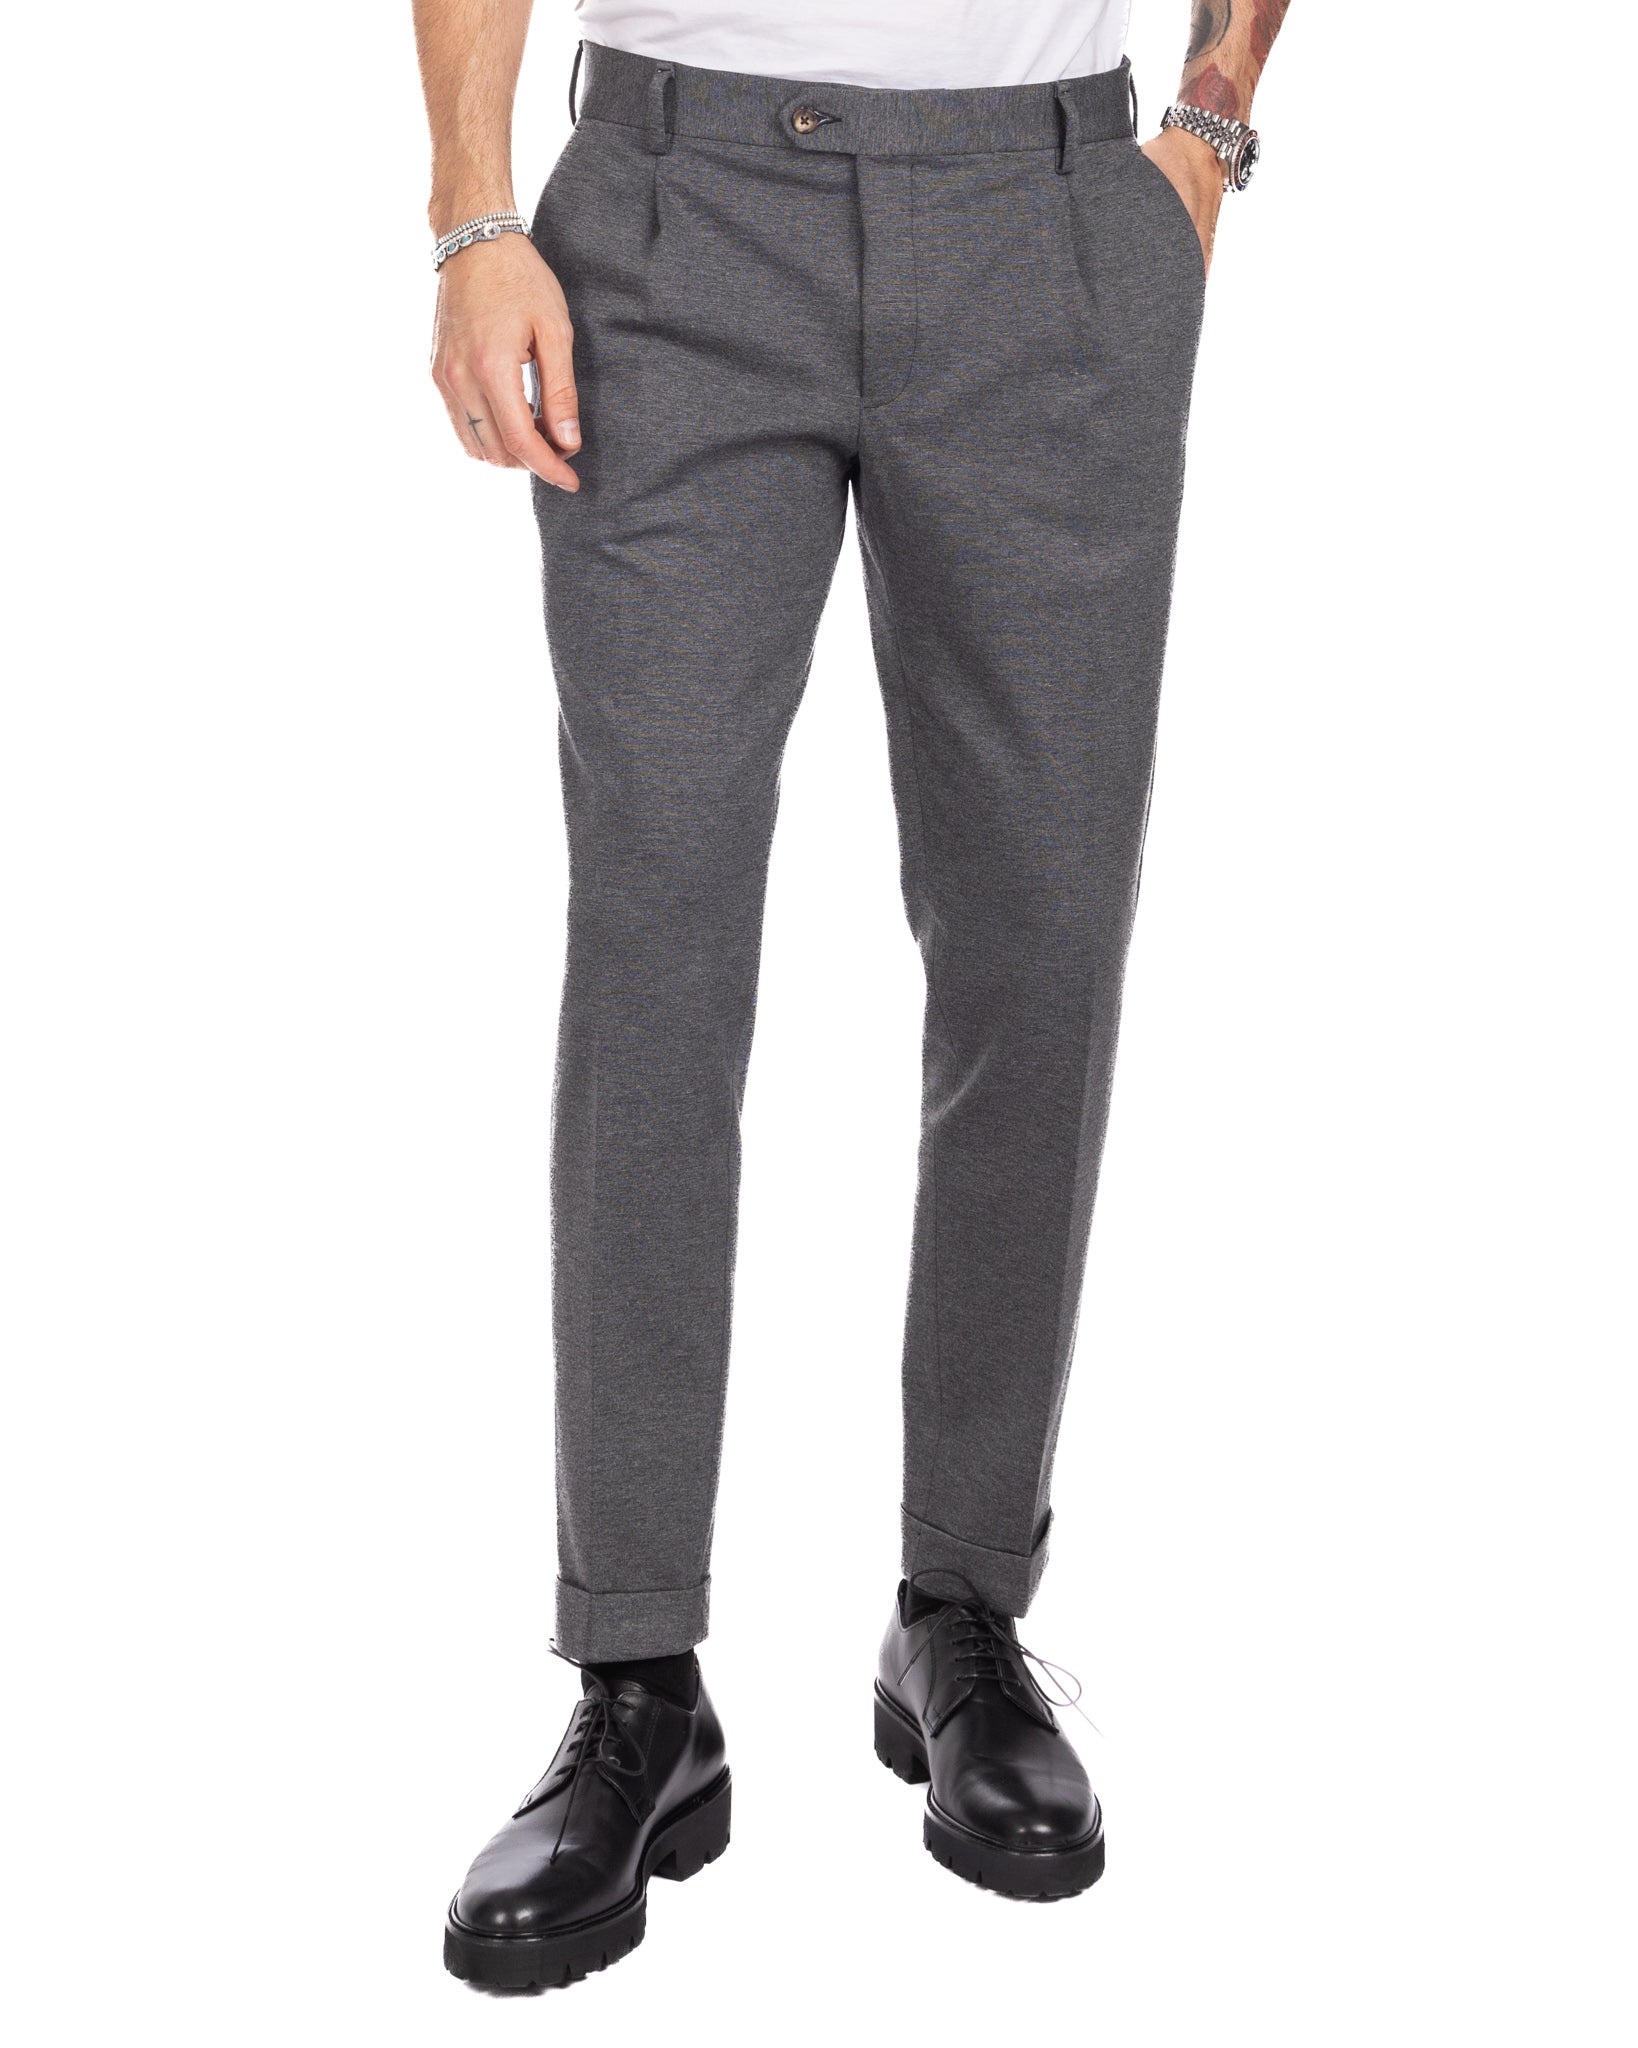 Firenze - trousers with a gray pleat in Milan stitch